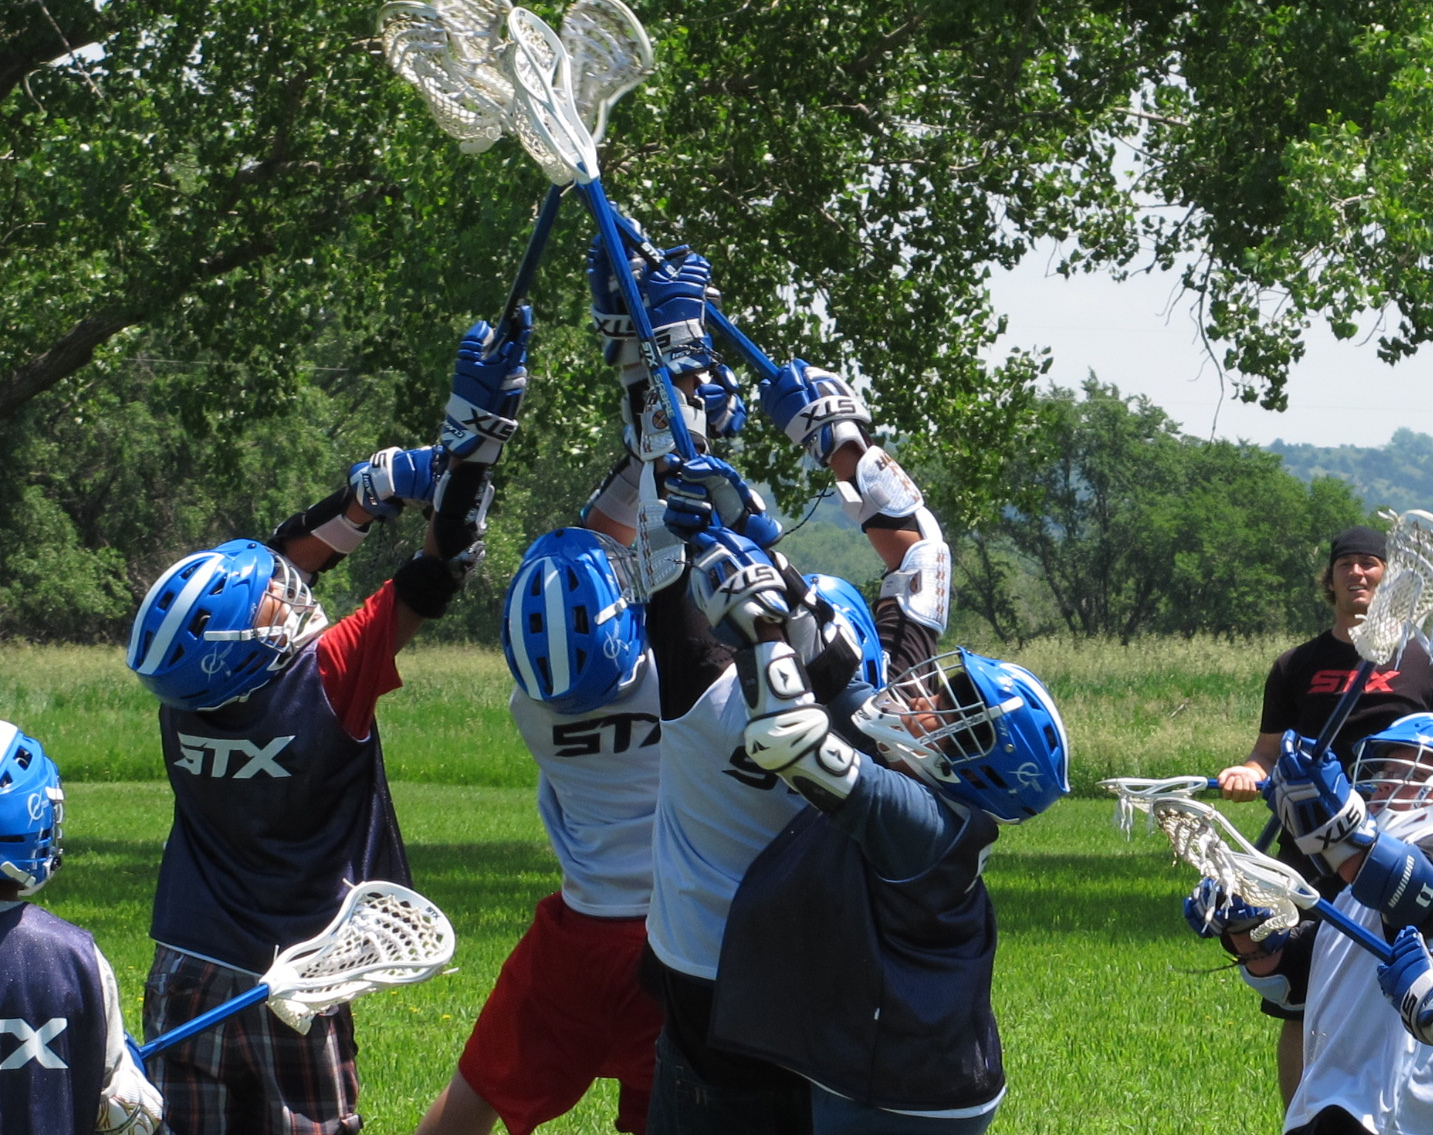 Lacrosse camp on the Yankton Sioux Reservation.